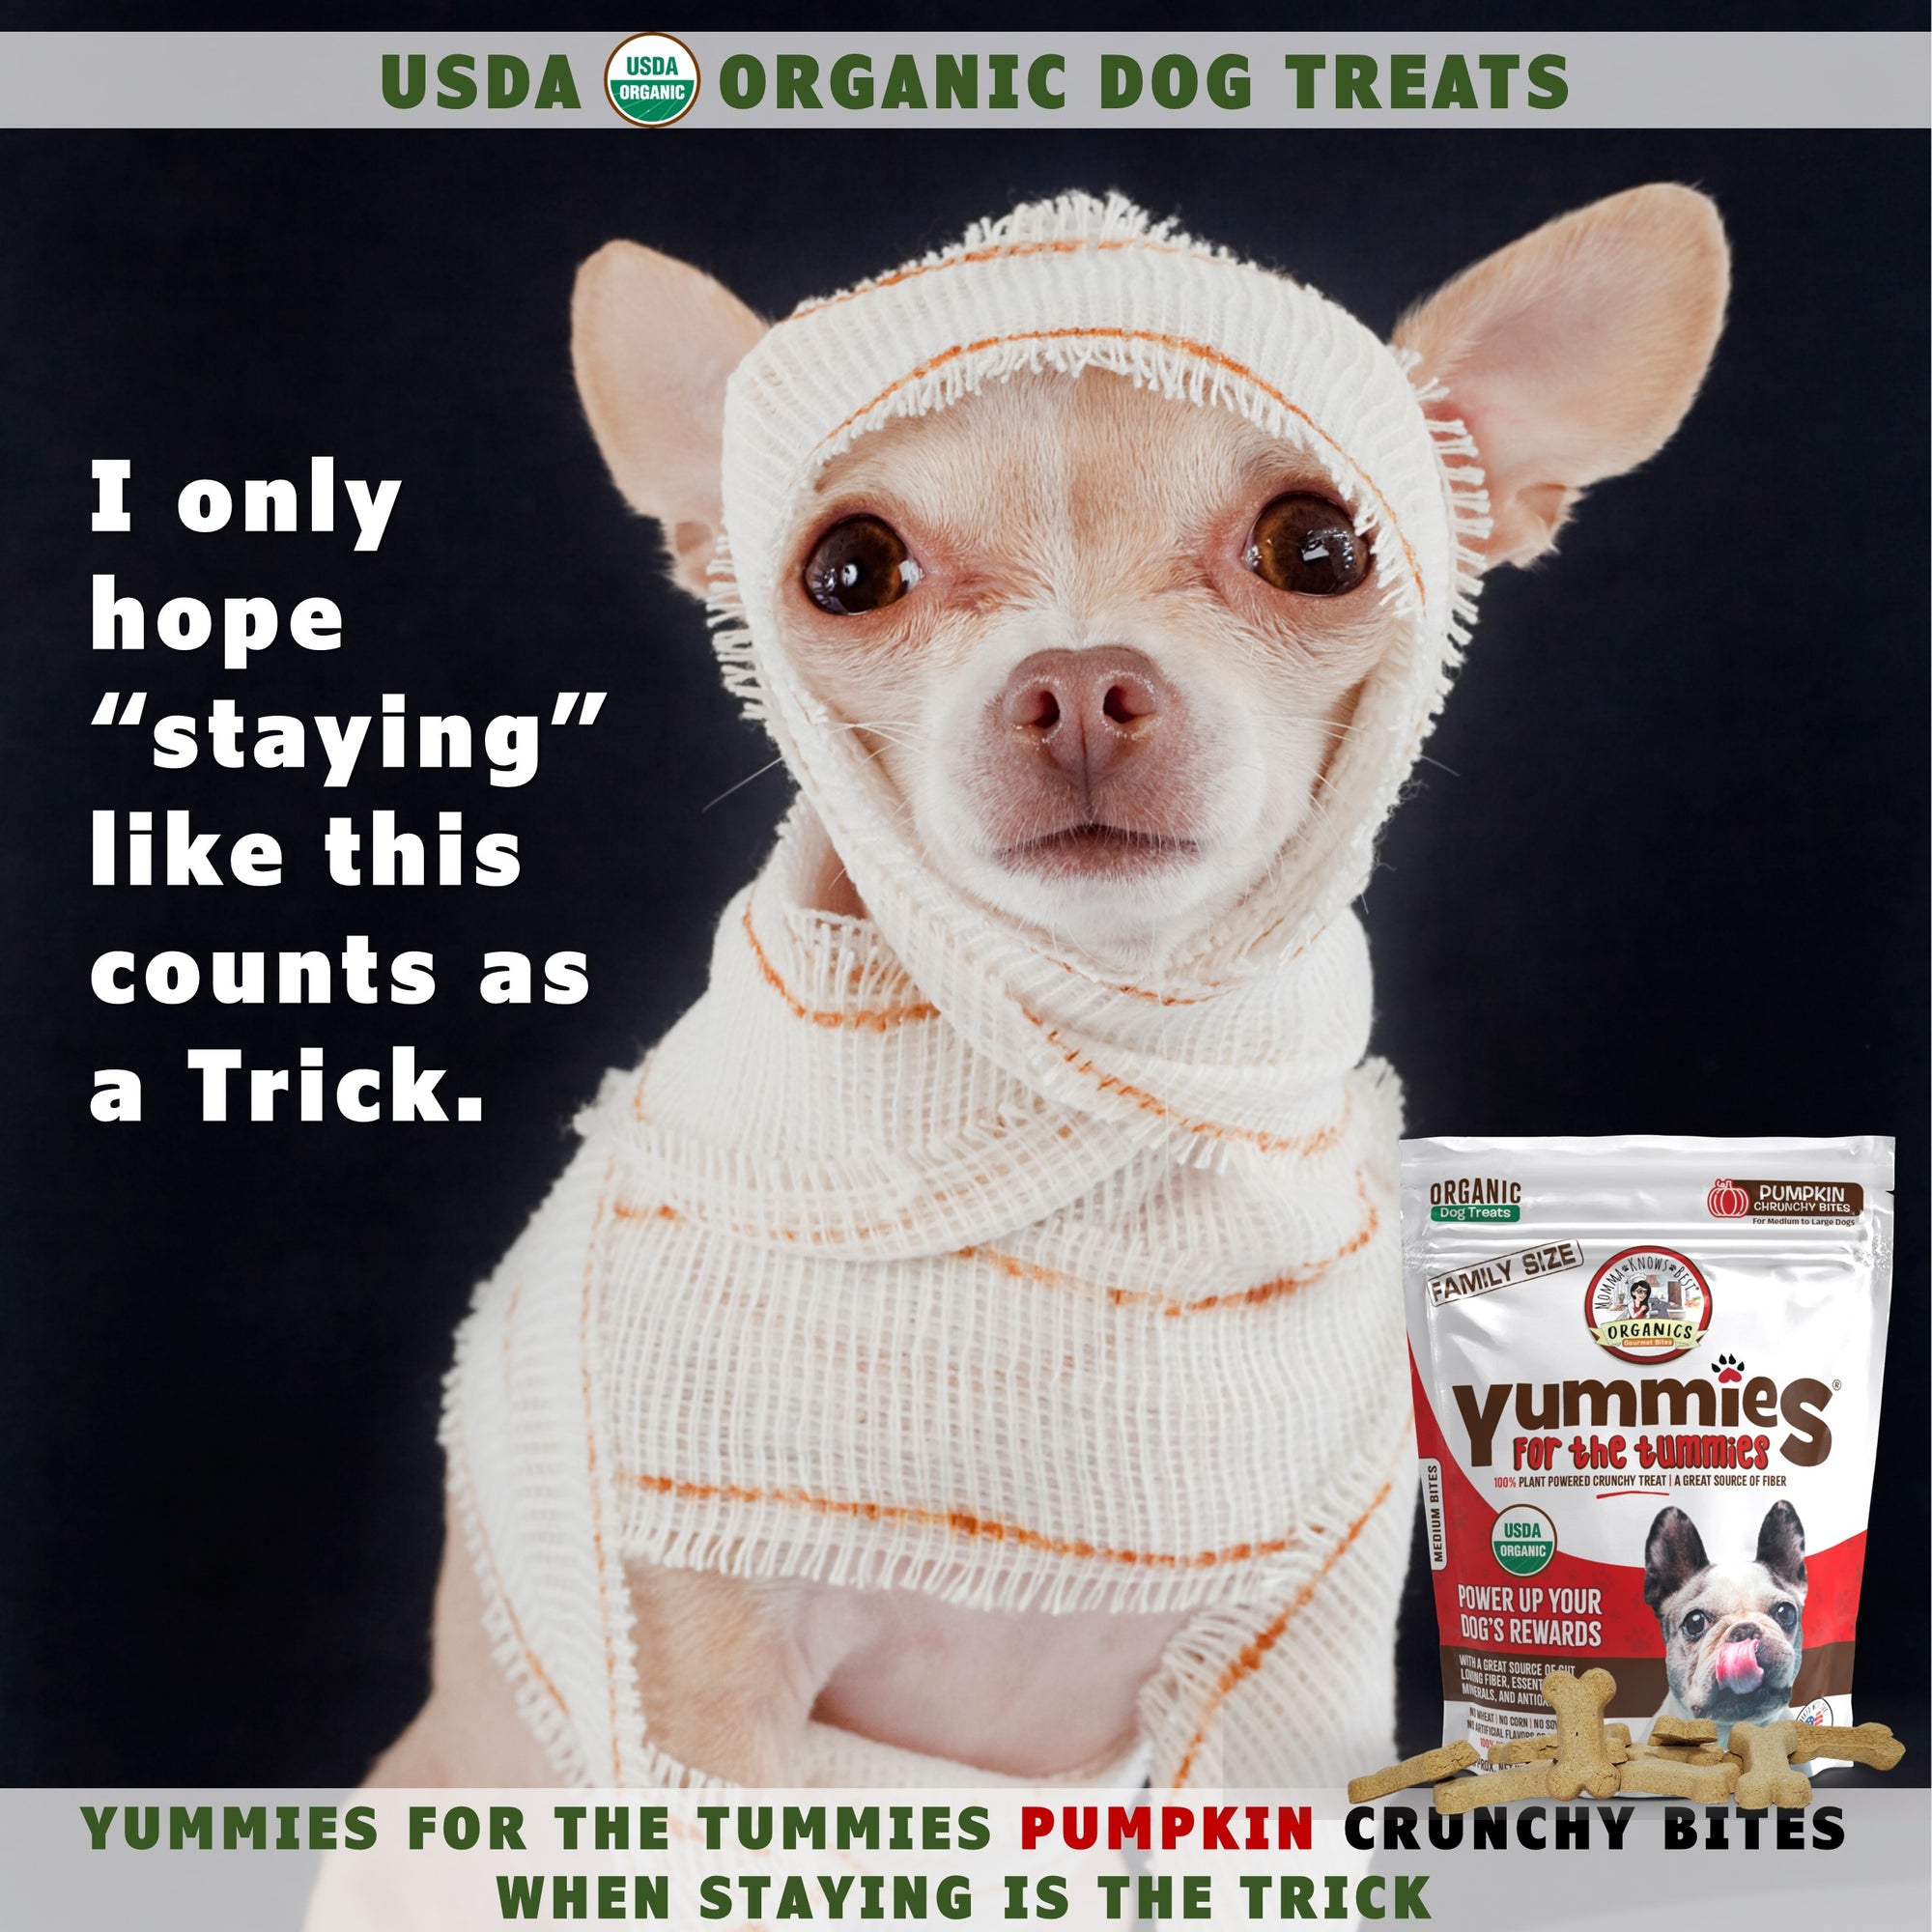 A dog wearing a bandage next to a bag of USDA organic pumpkin dog biscuits Yummies for the Tummies by Momma Knows Best